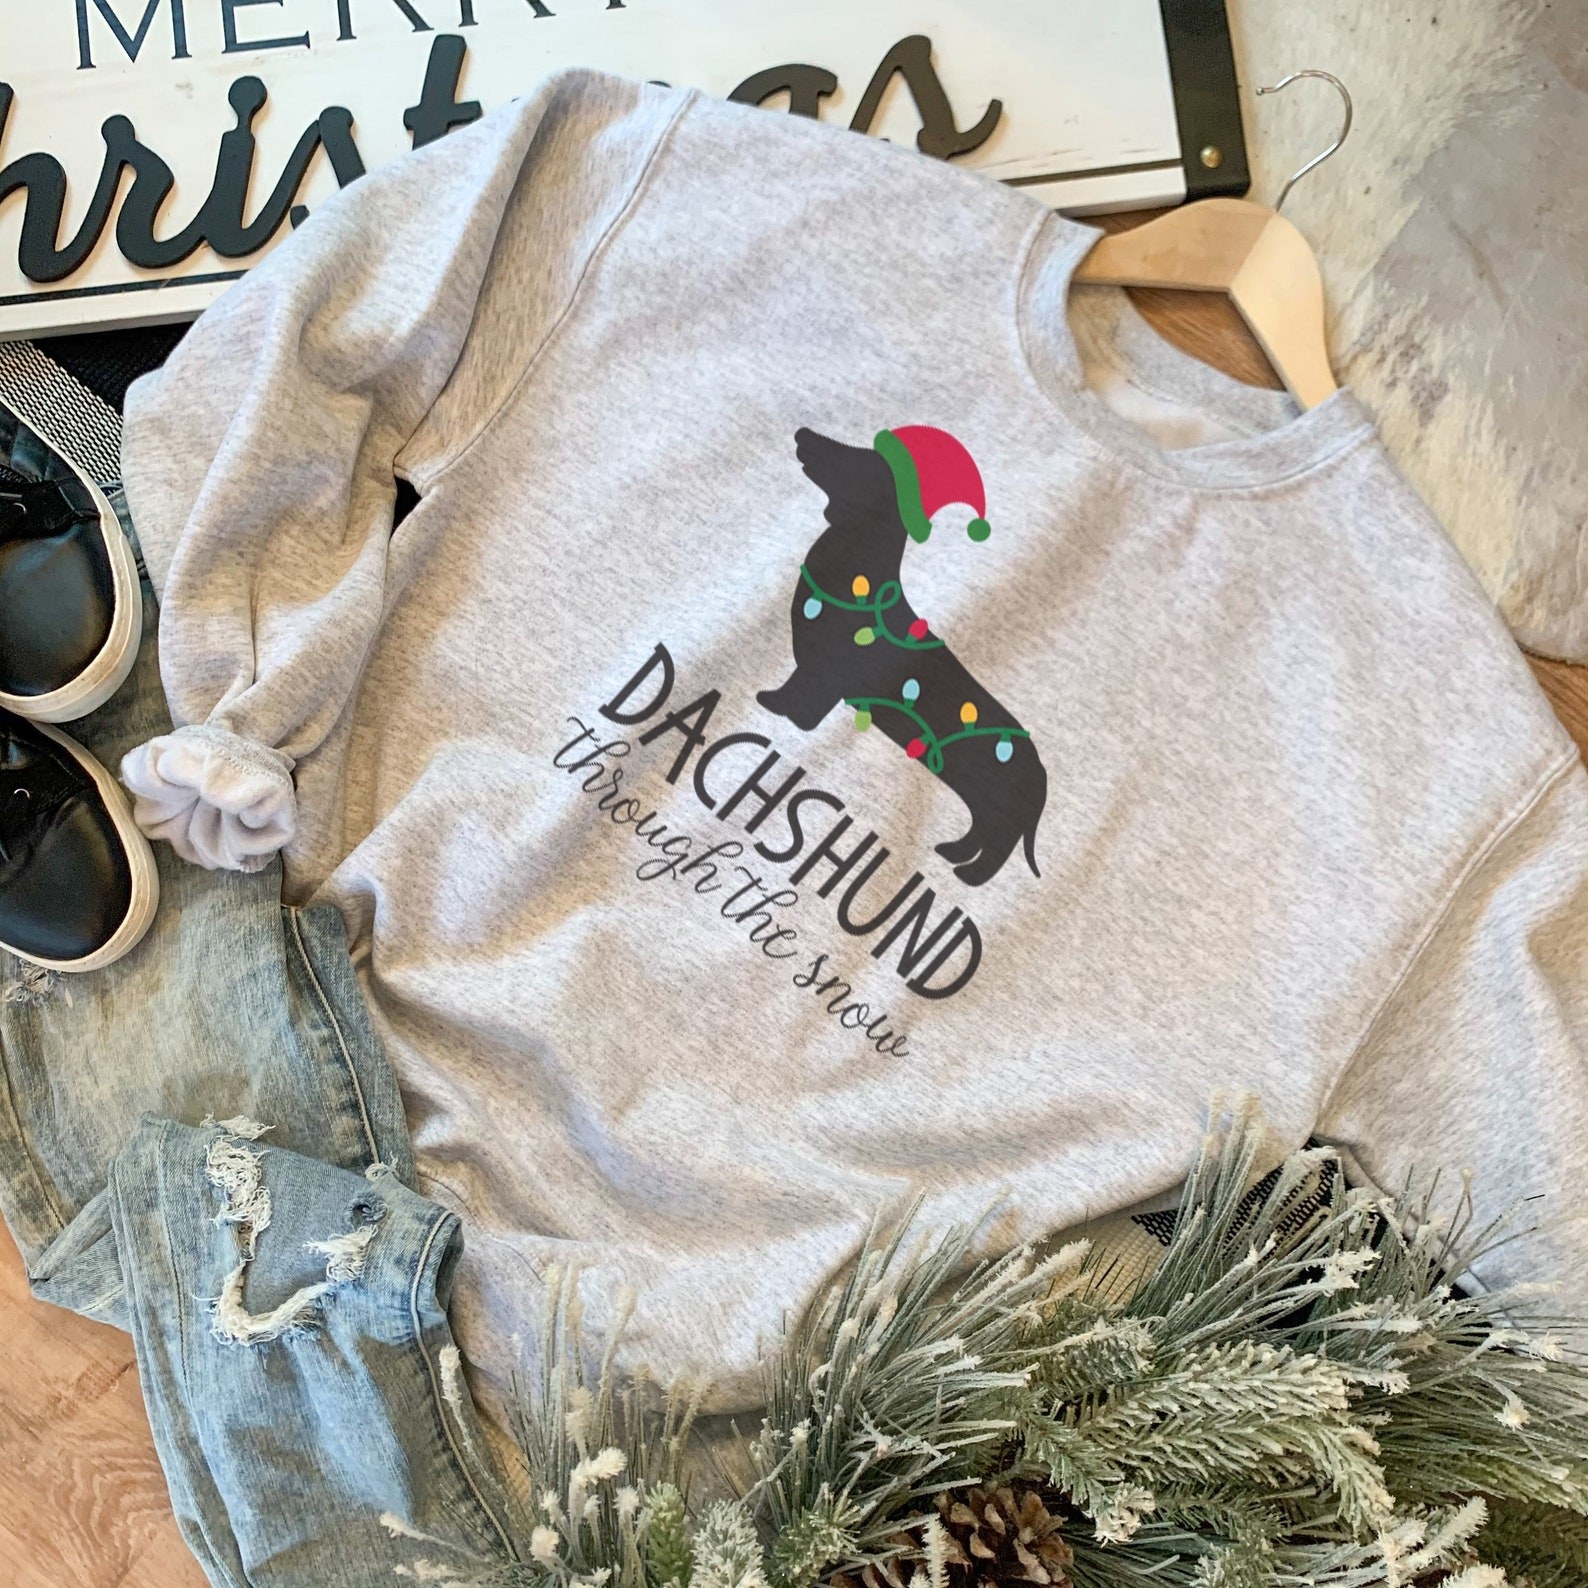 The grey sweatshirt with a dachshund wrapped in Christmas lights and text &quot;dachshund through the snow&quot;